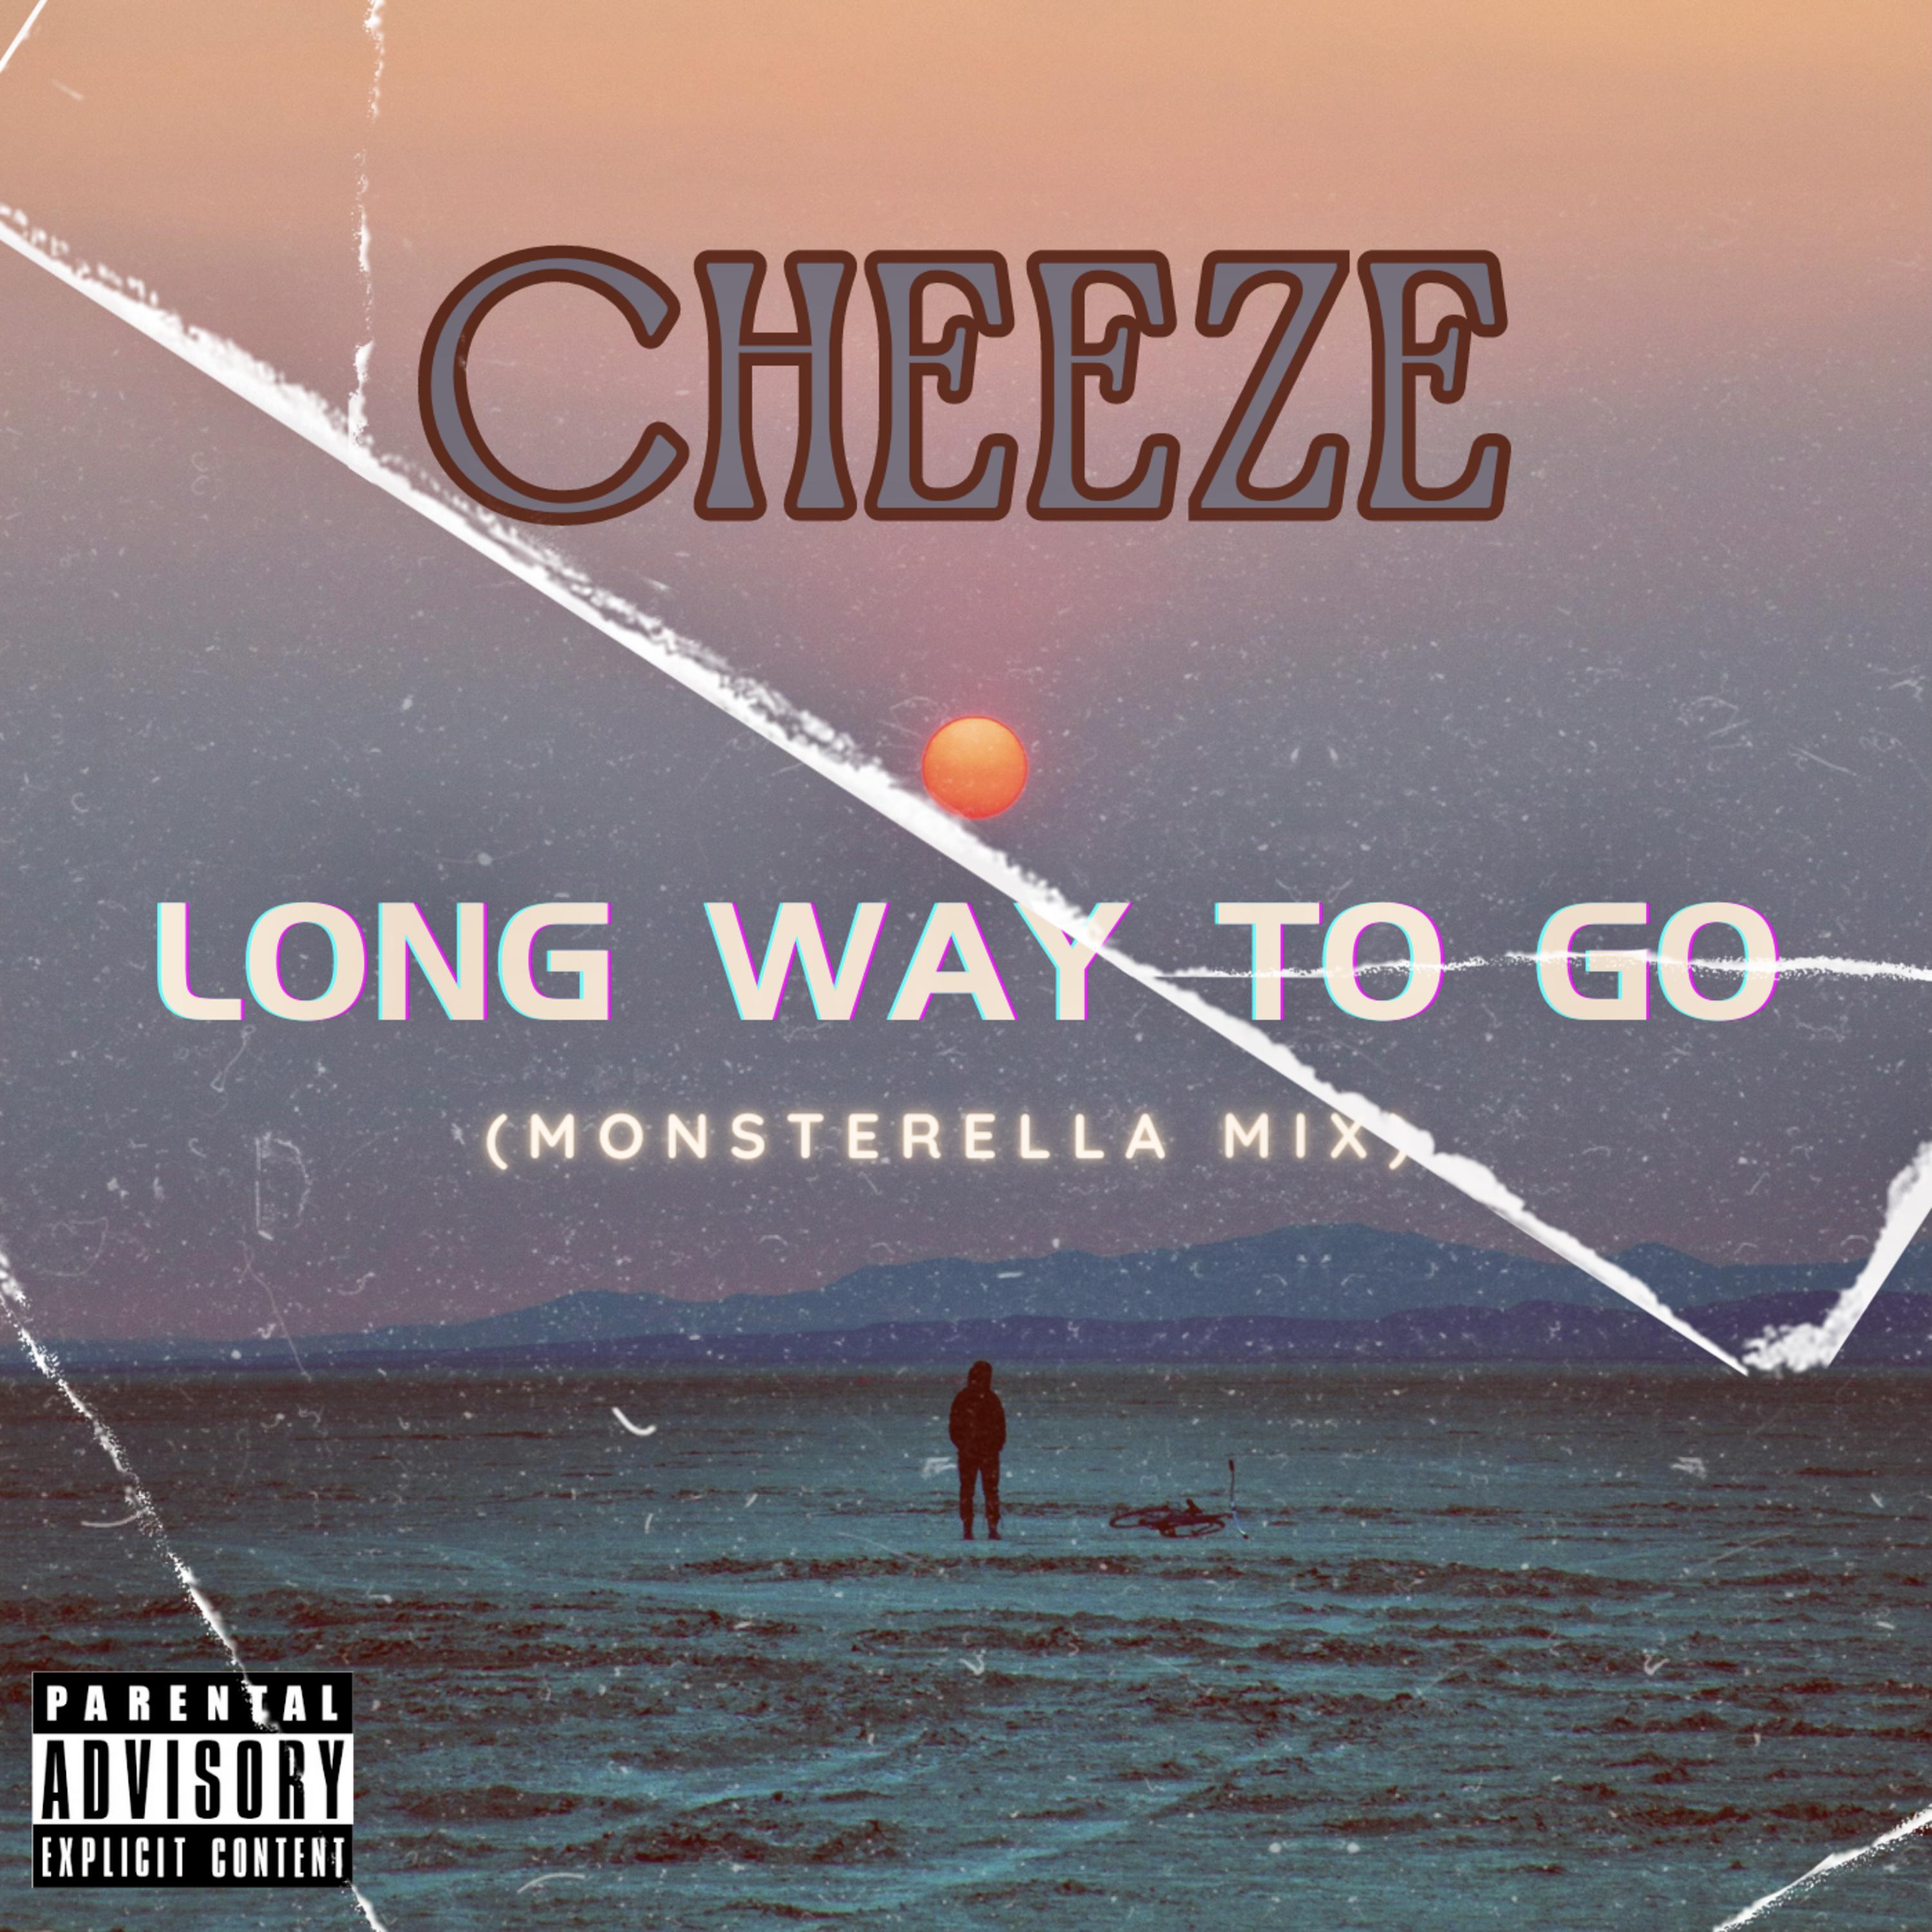 Cheeze - Long Way To Go (Monsterella Mix)